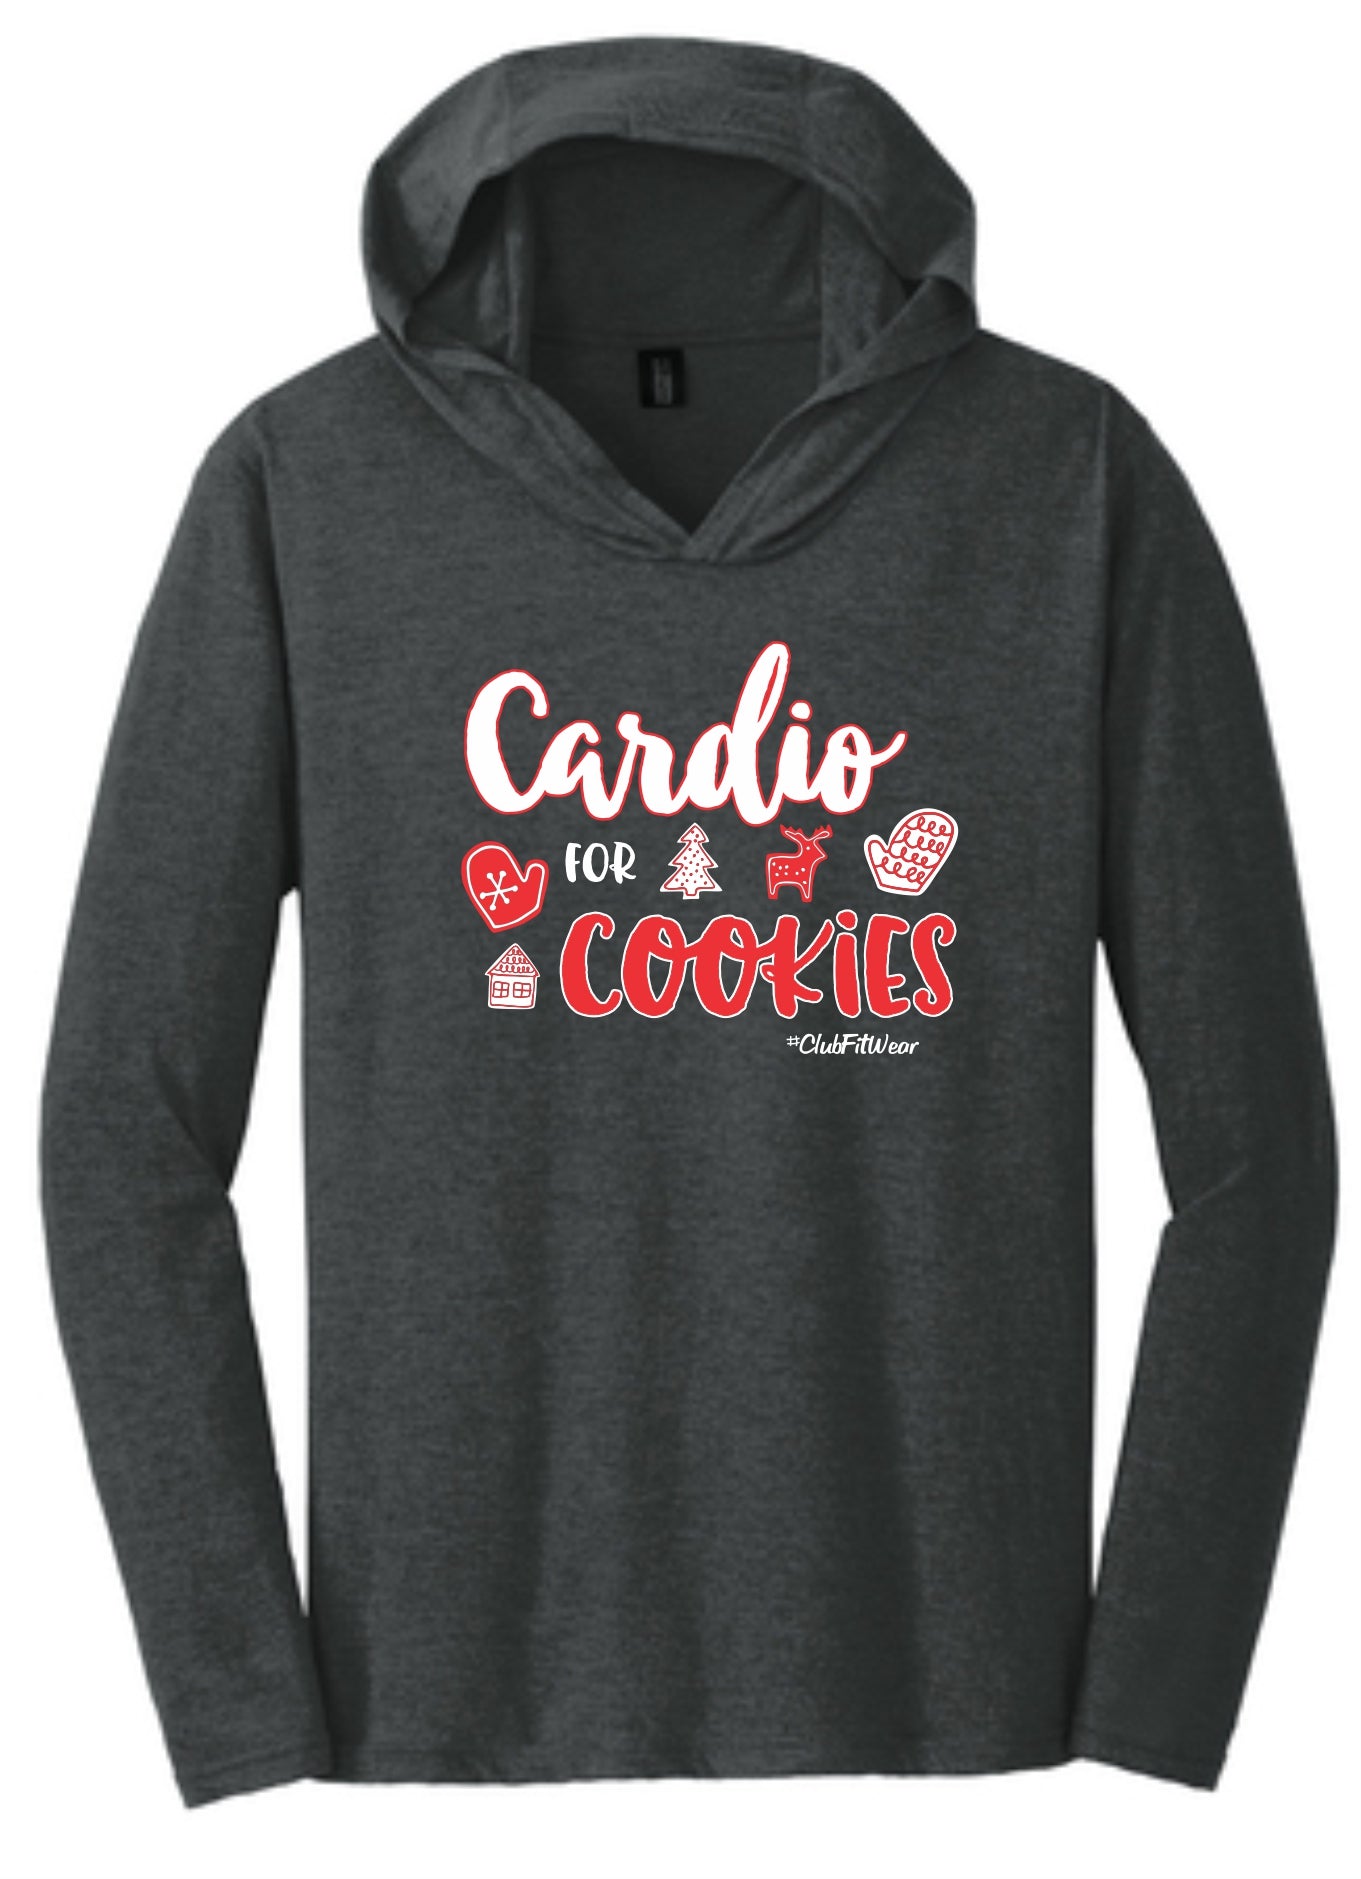 Cardio for Cookies - Hooded Pullover